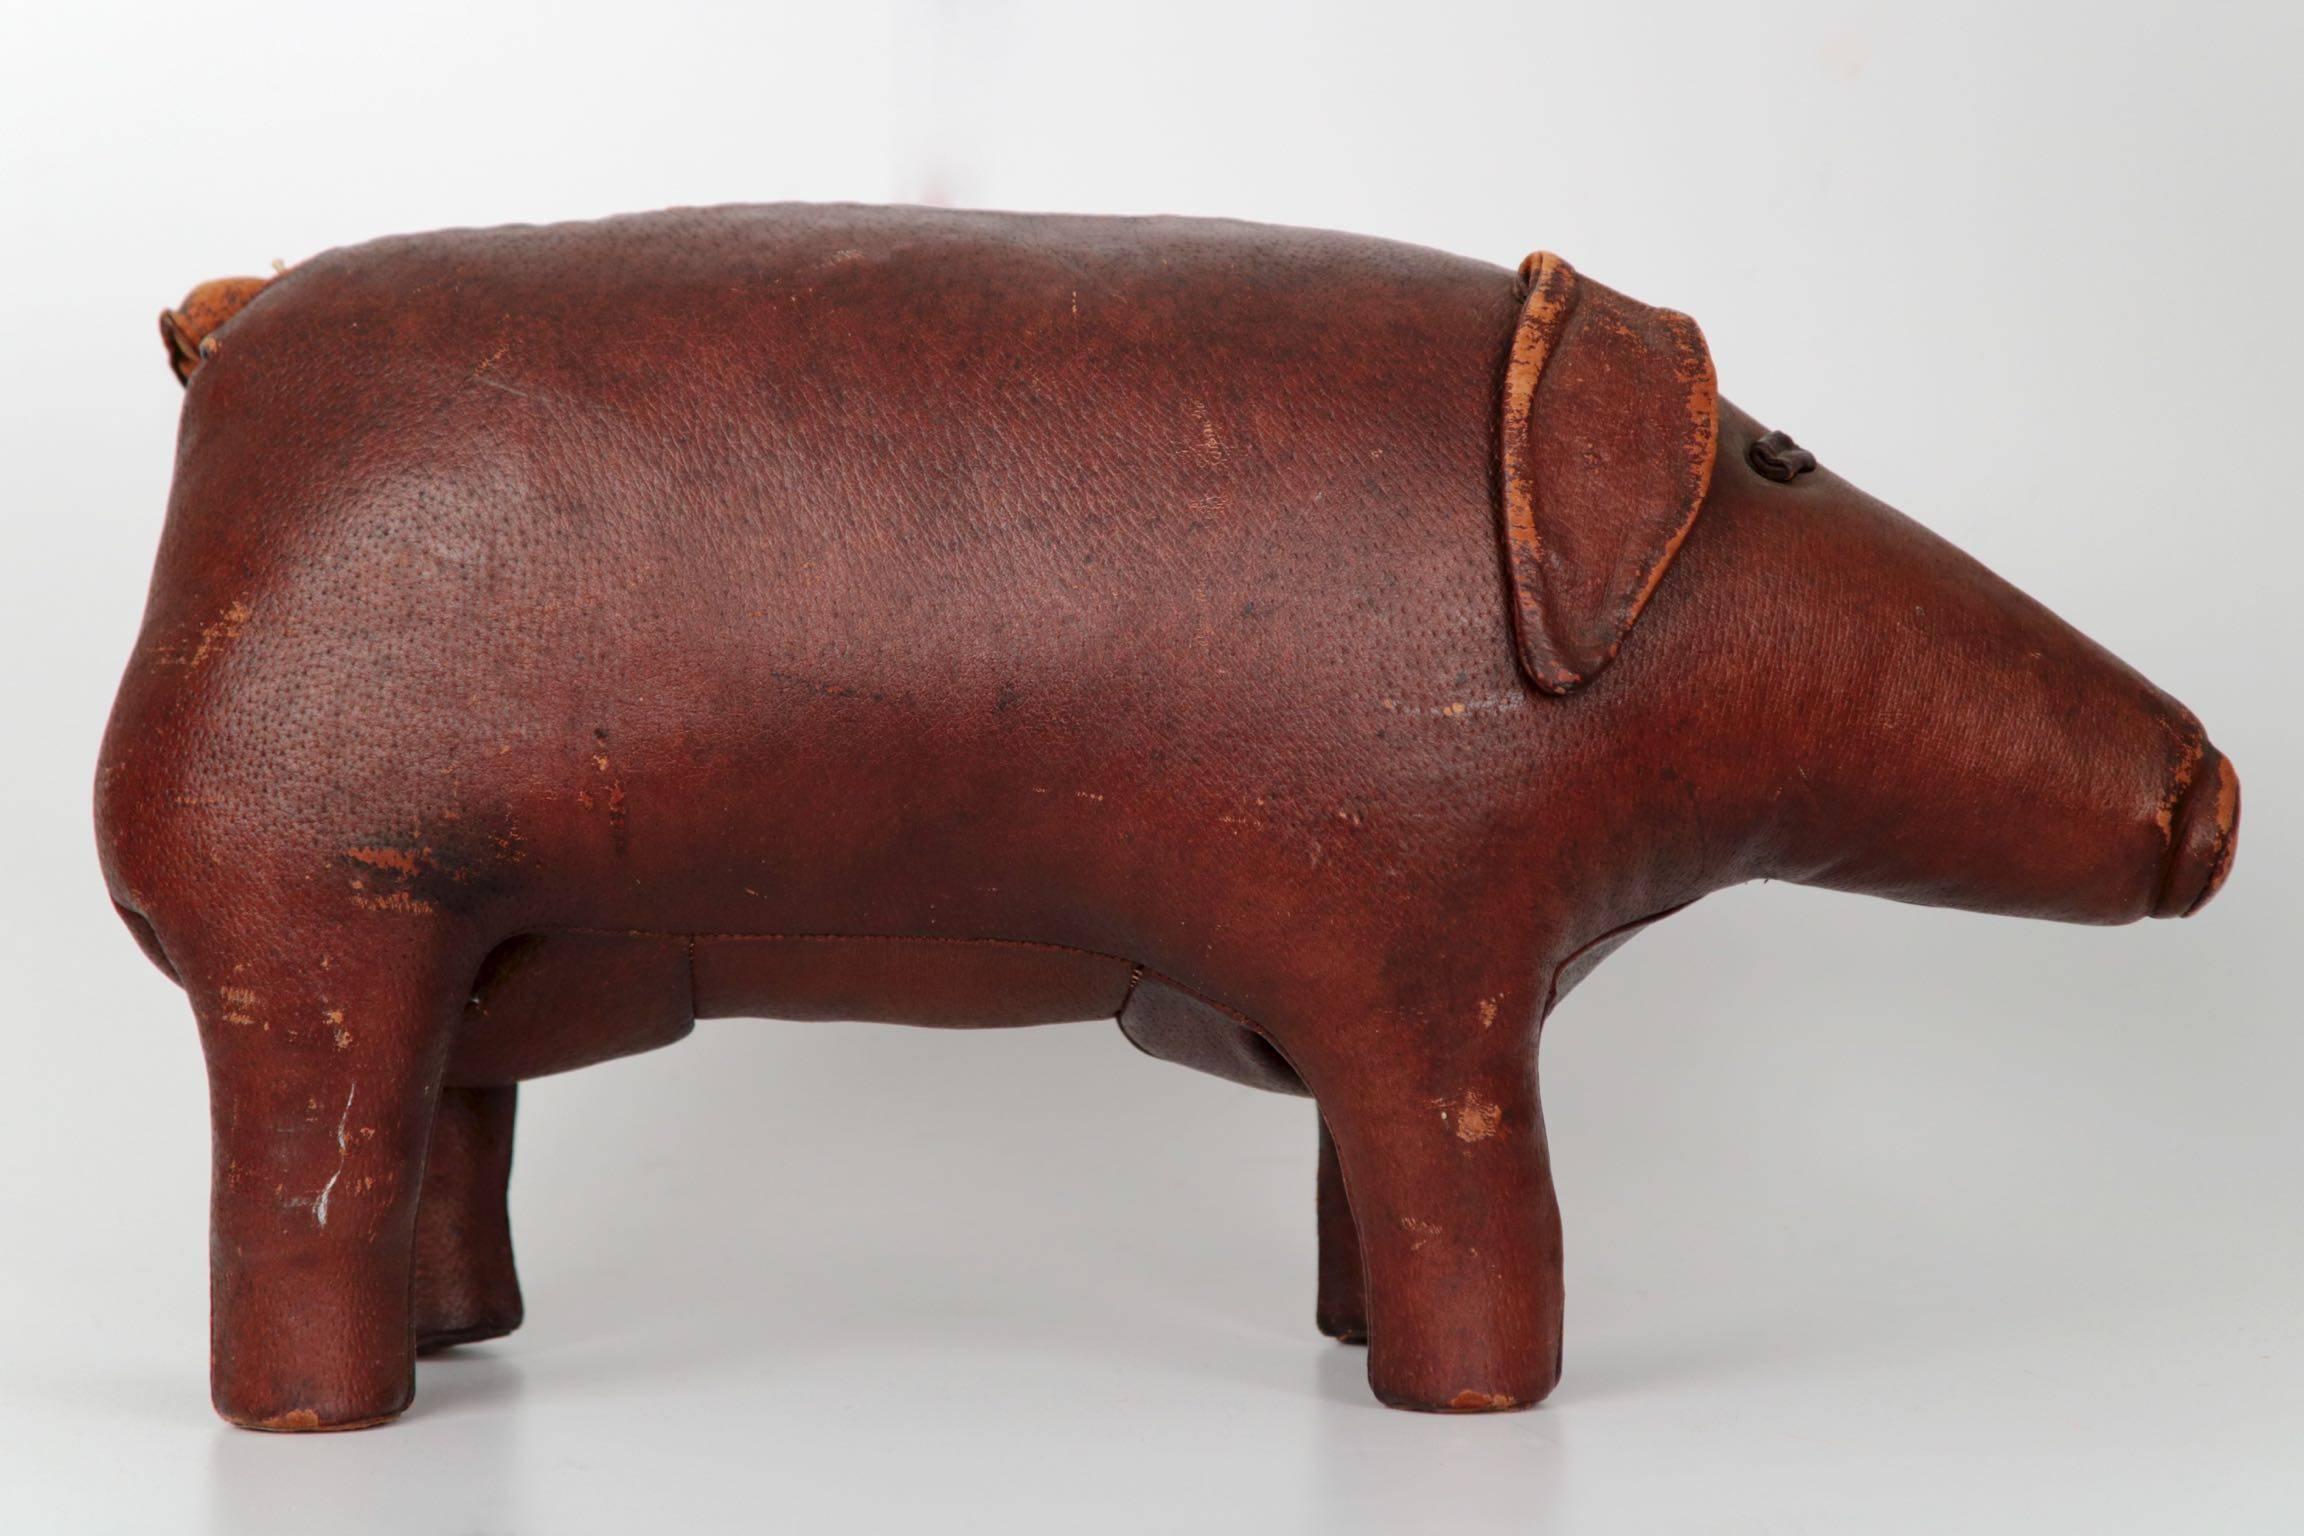 Mid-20th Century Stitched Leather Pig Footstool Ottoman by Dimitri Osmera for Abercrombie & Fitch